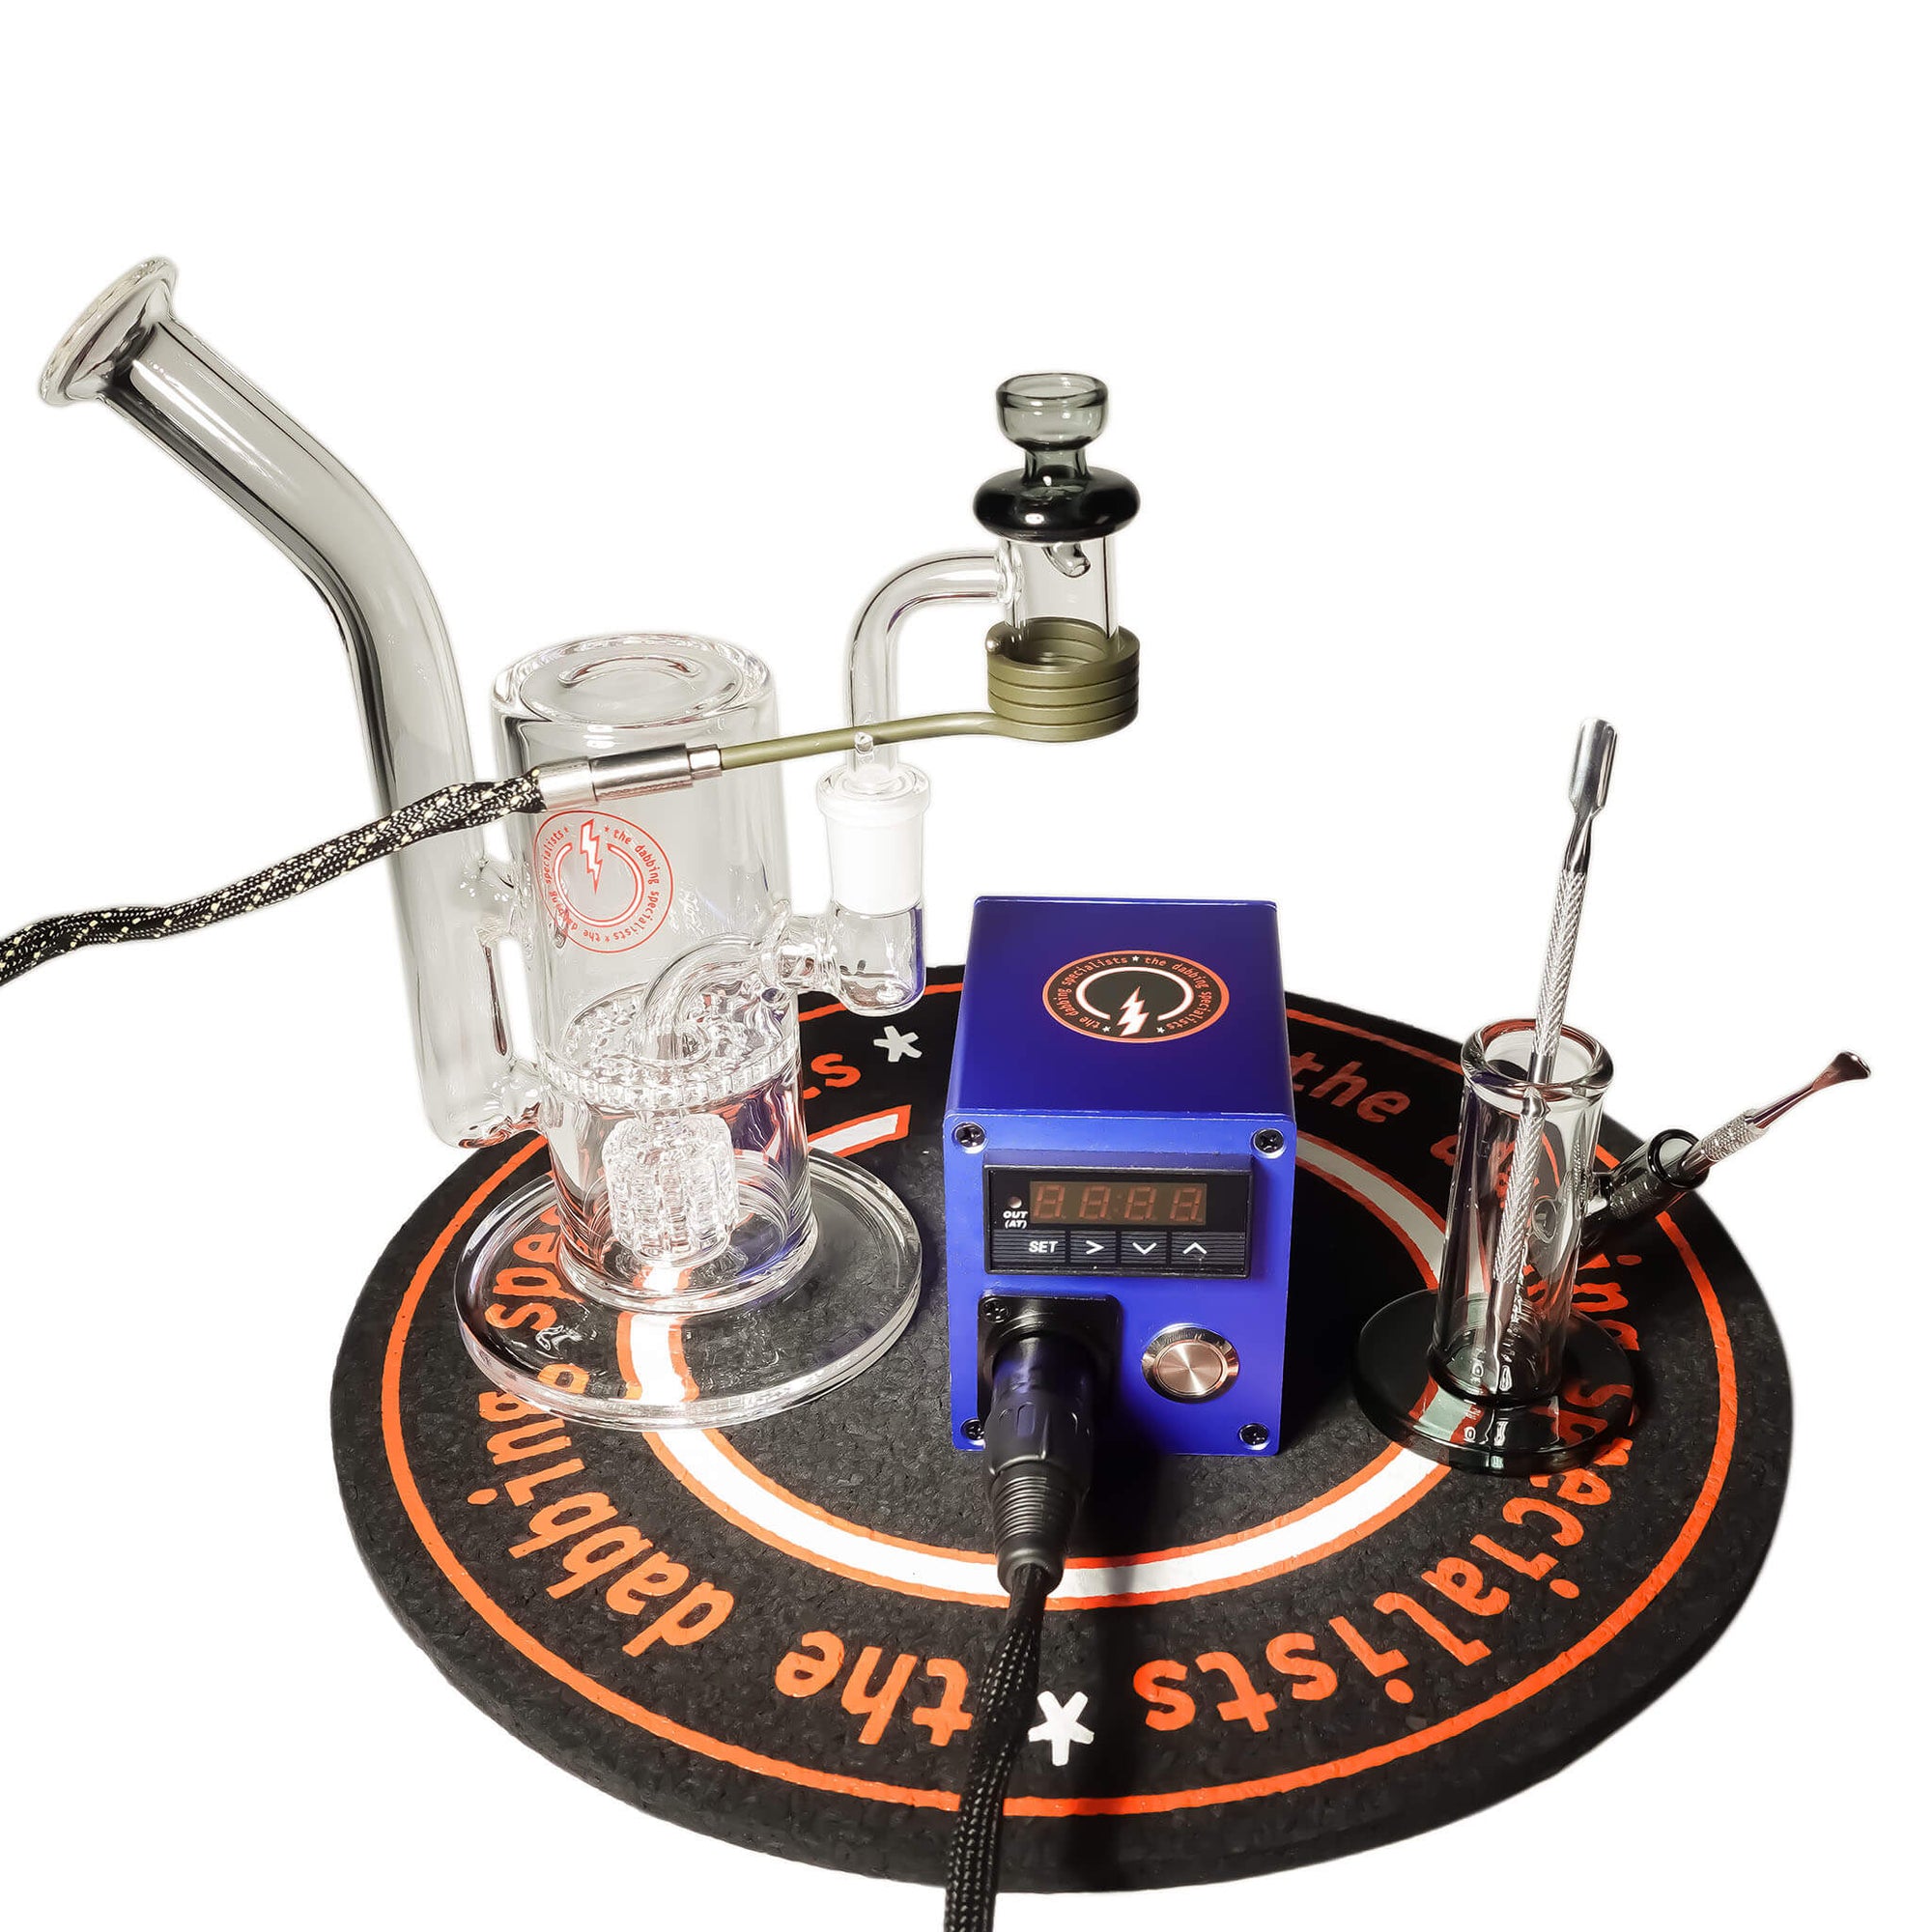 Reborn 20mm E-Banger Deluxe Enail Kit | Blue Kit View | the dabbing specialists